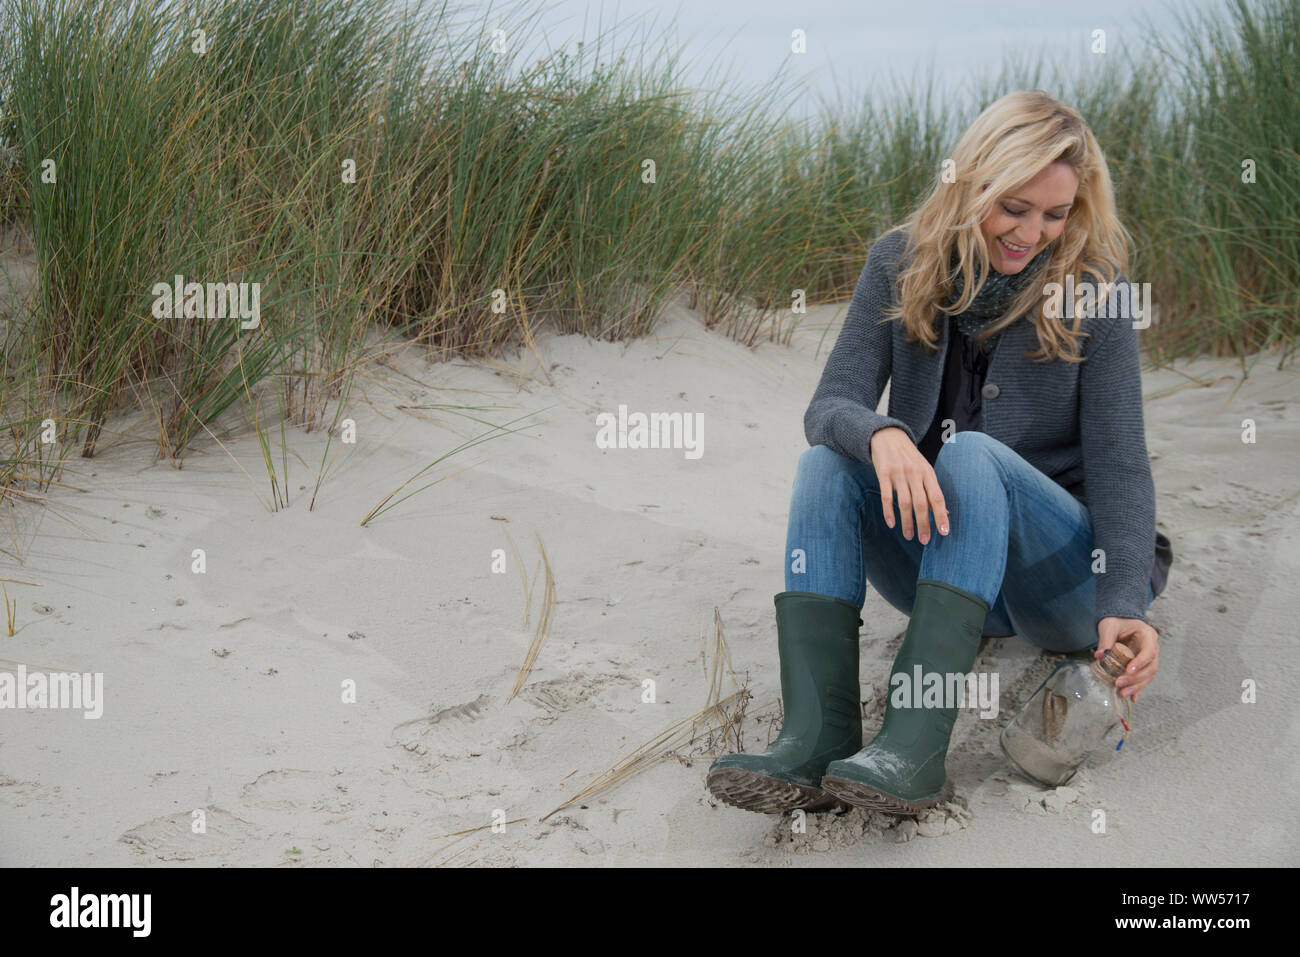 Blond woman with wellingtons and bottle half full of sand Stock Photo